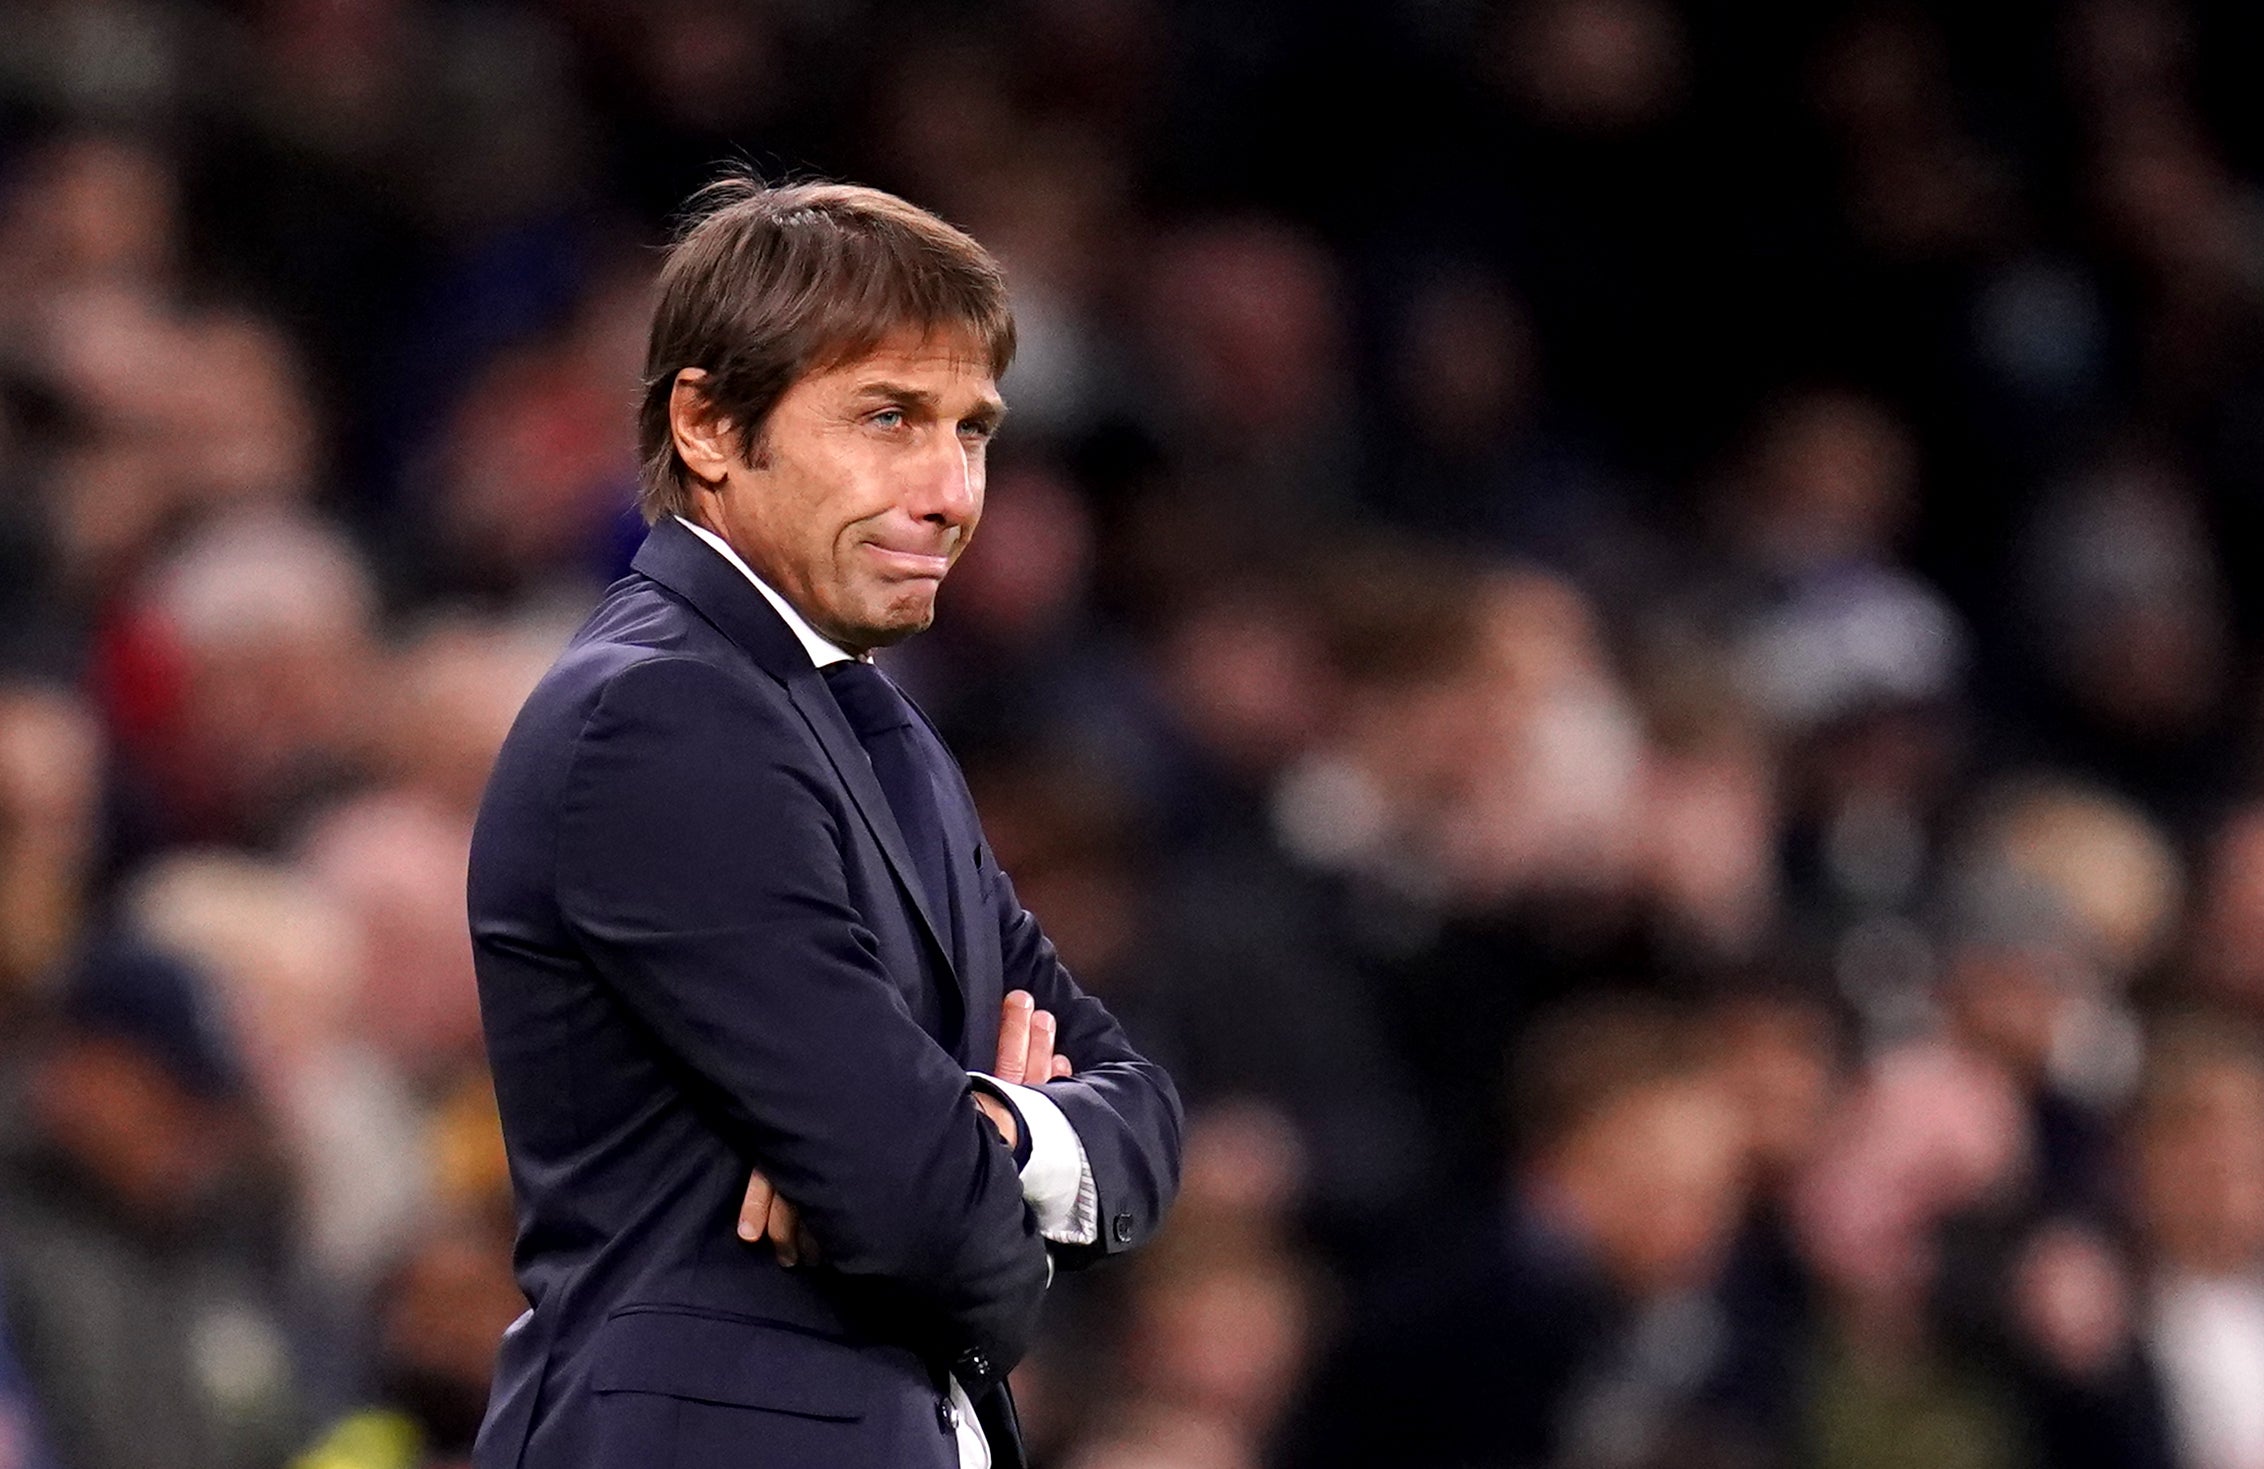 Antonio Conte knows he faces a big challenge to get Spurs challenging for the title